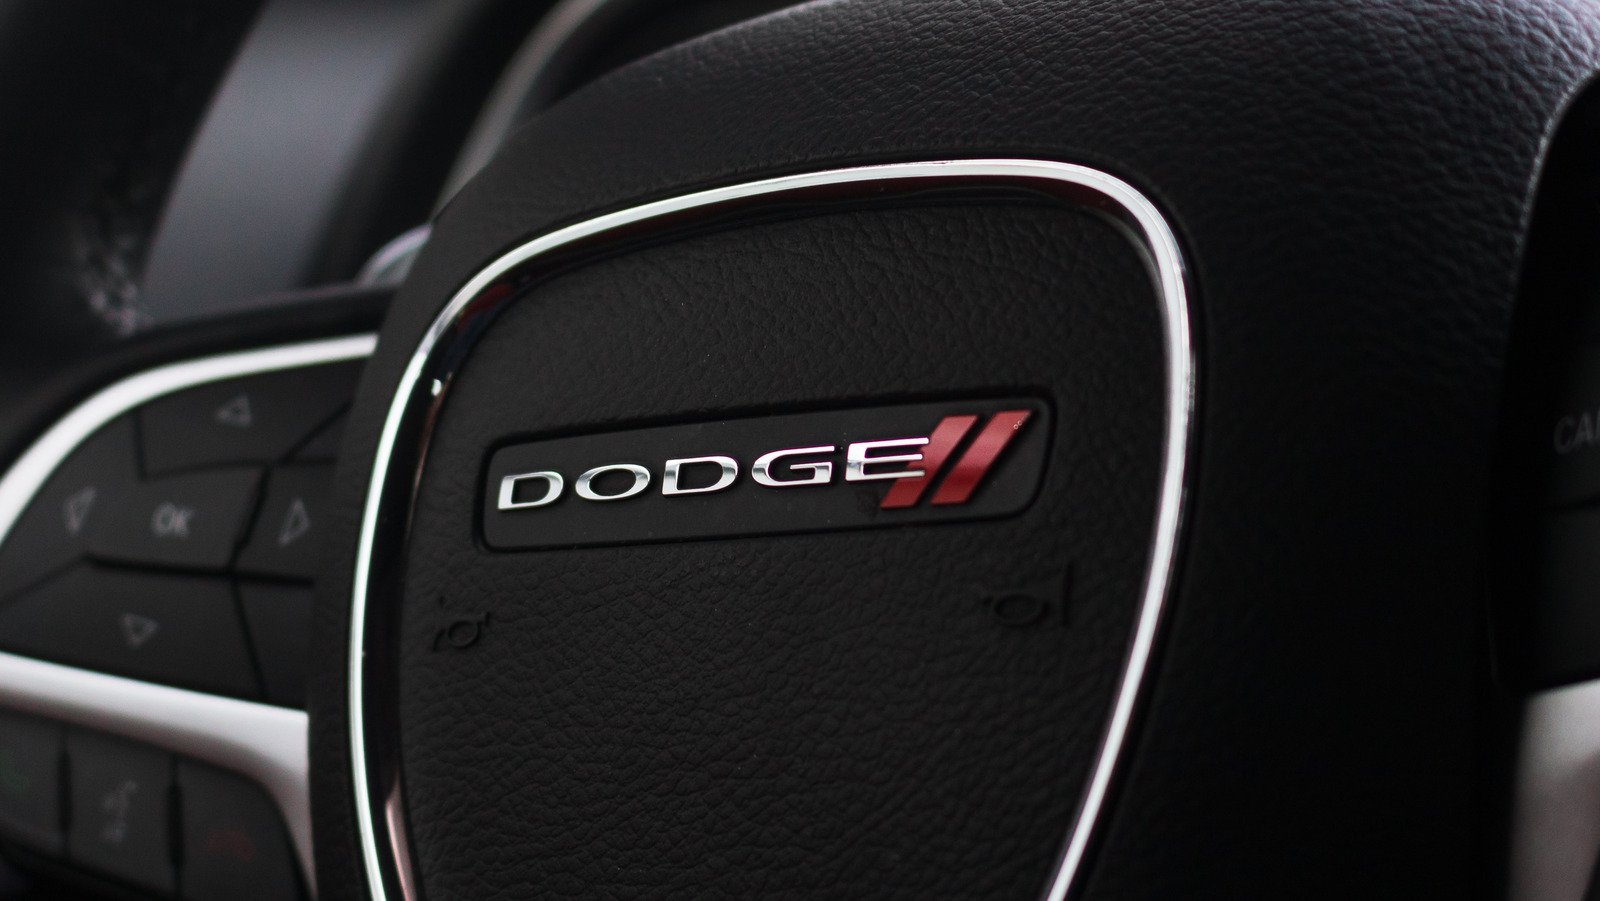 What's The Worst Current Dodge Model? Here's What Car Fans Said - Exclusive Survey